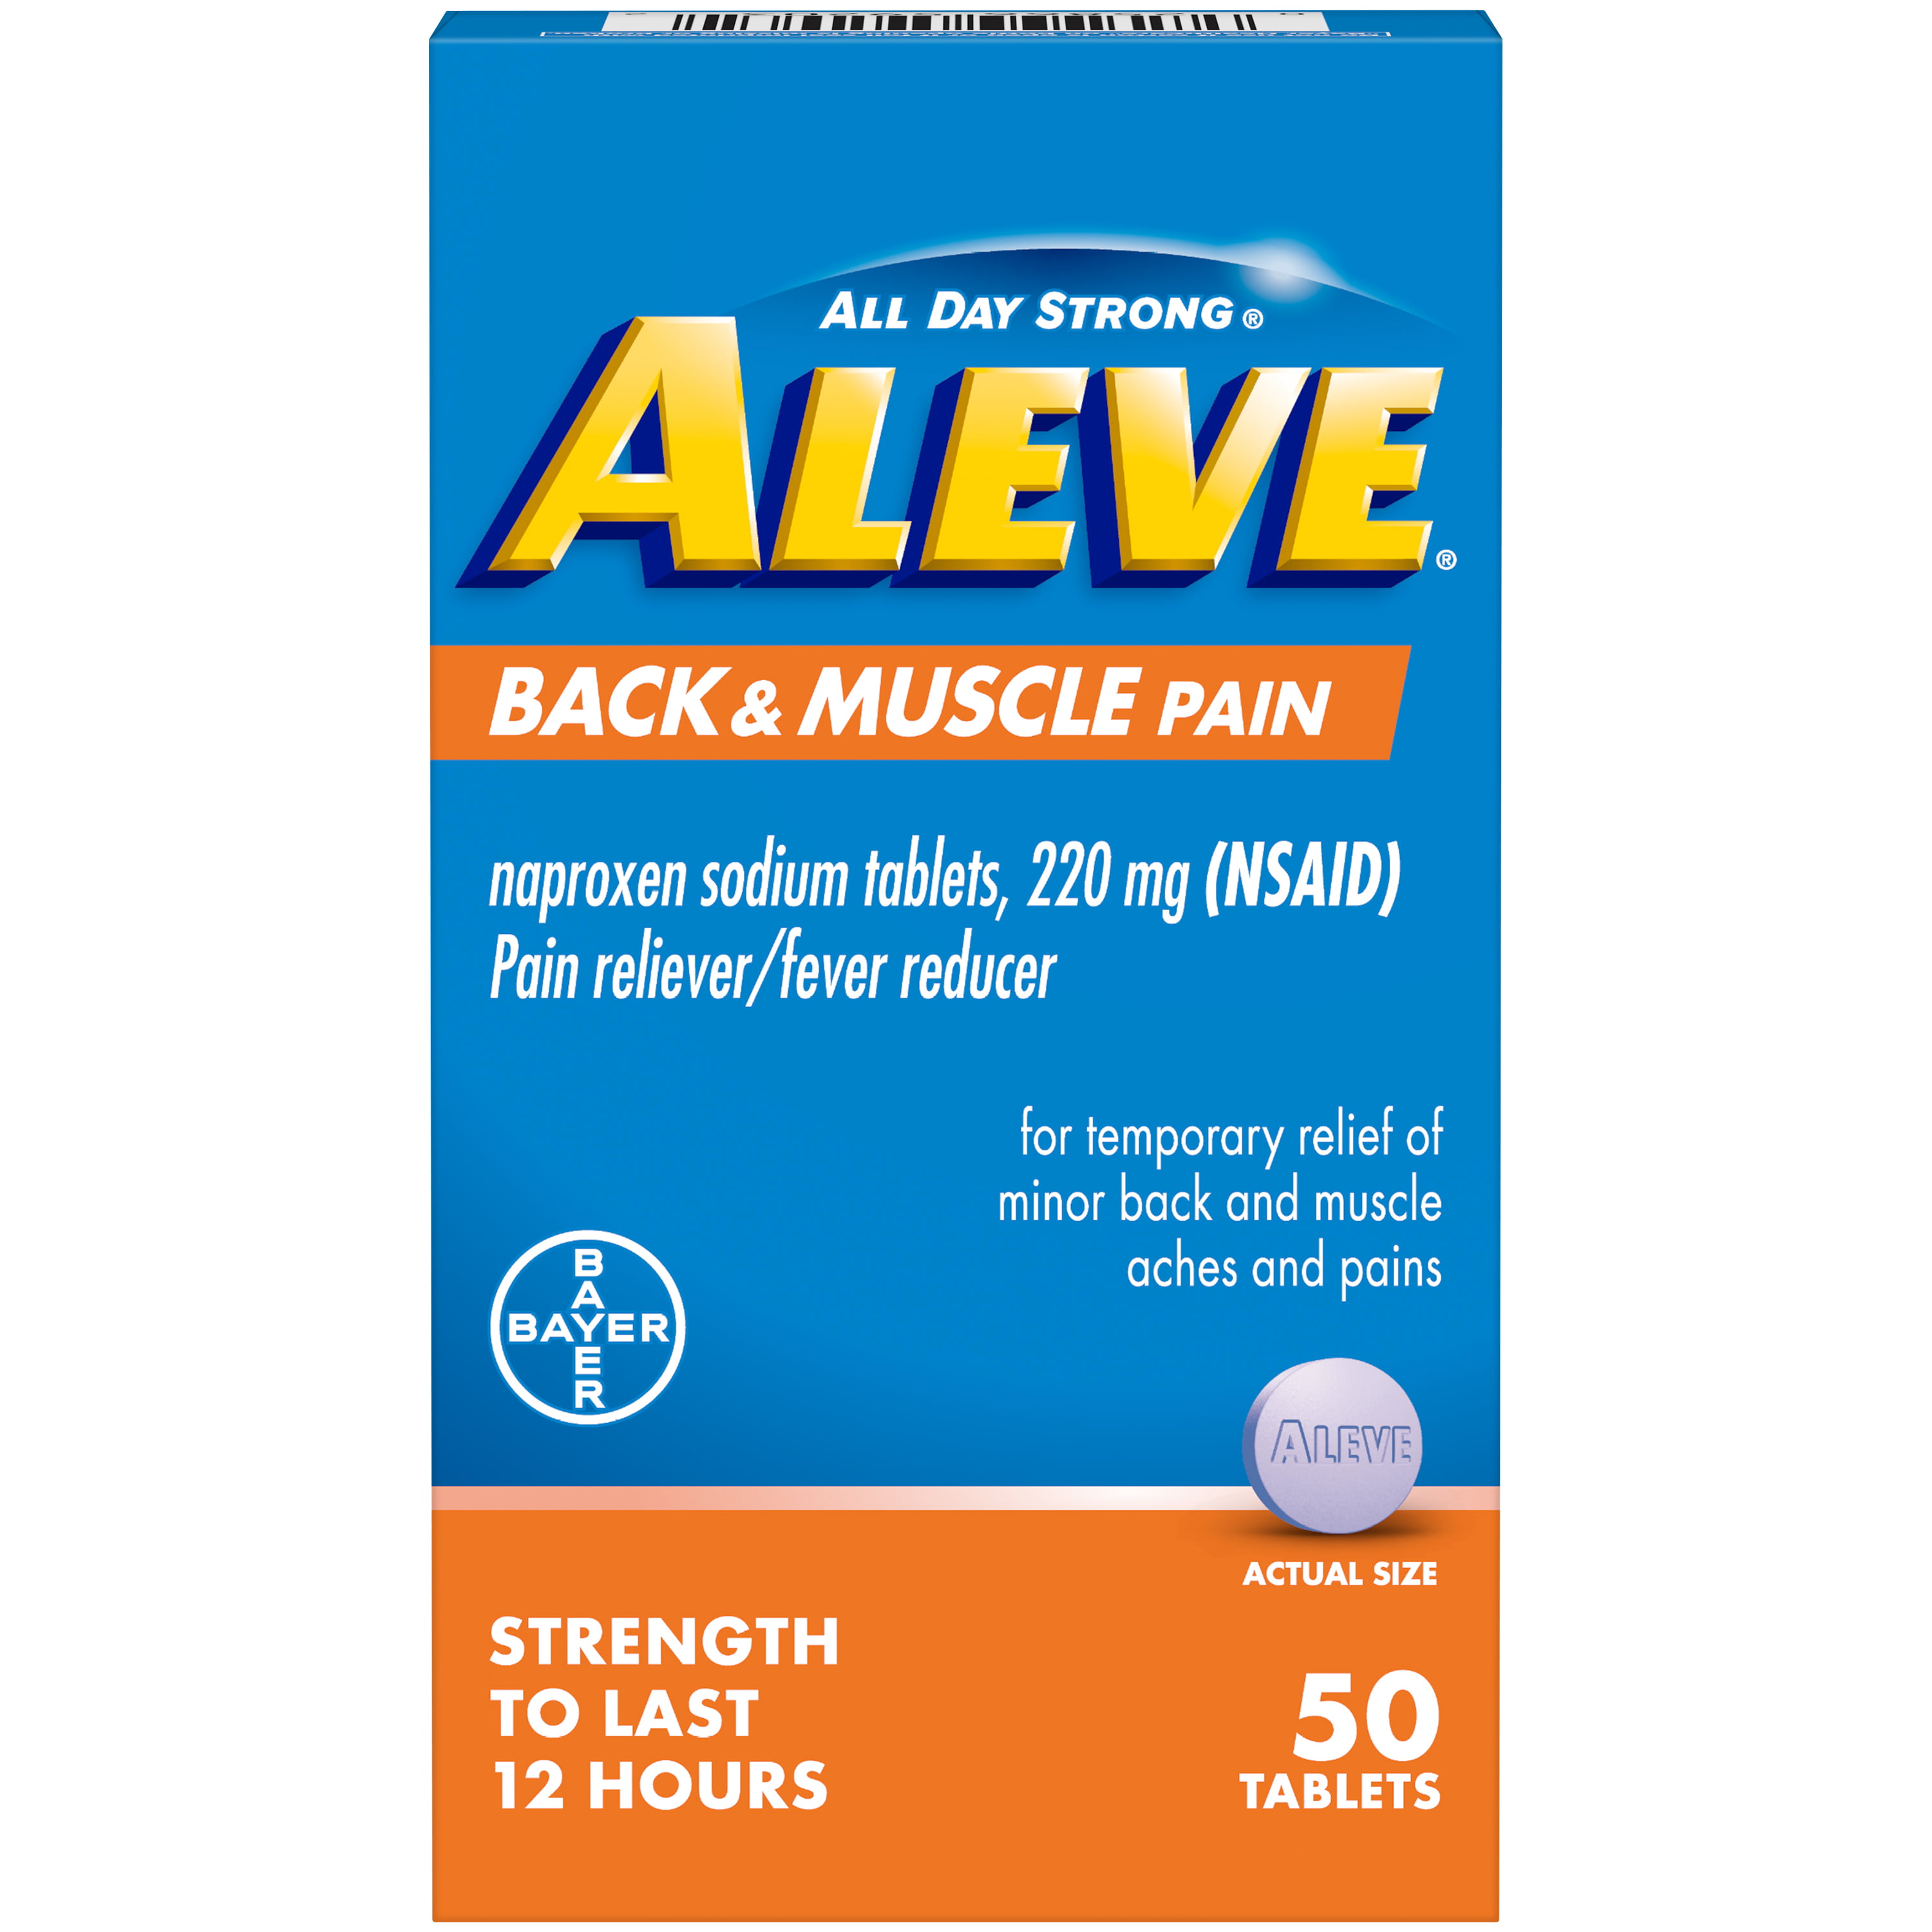 aleve-back-muscle-pain-relief-naproxen-sodium-tablets-50-count